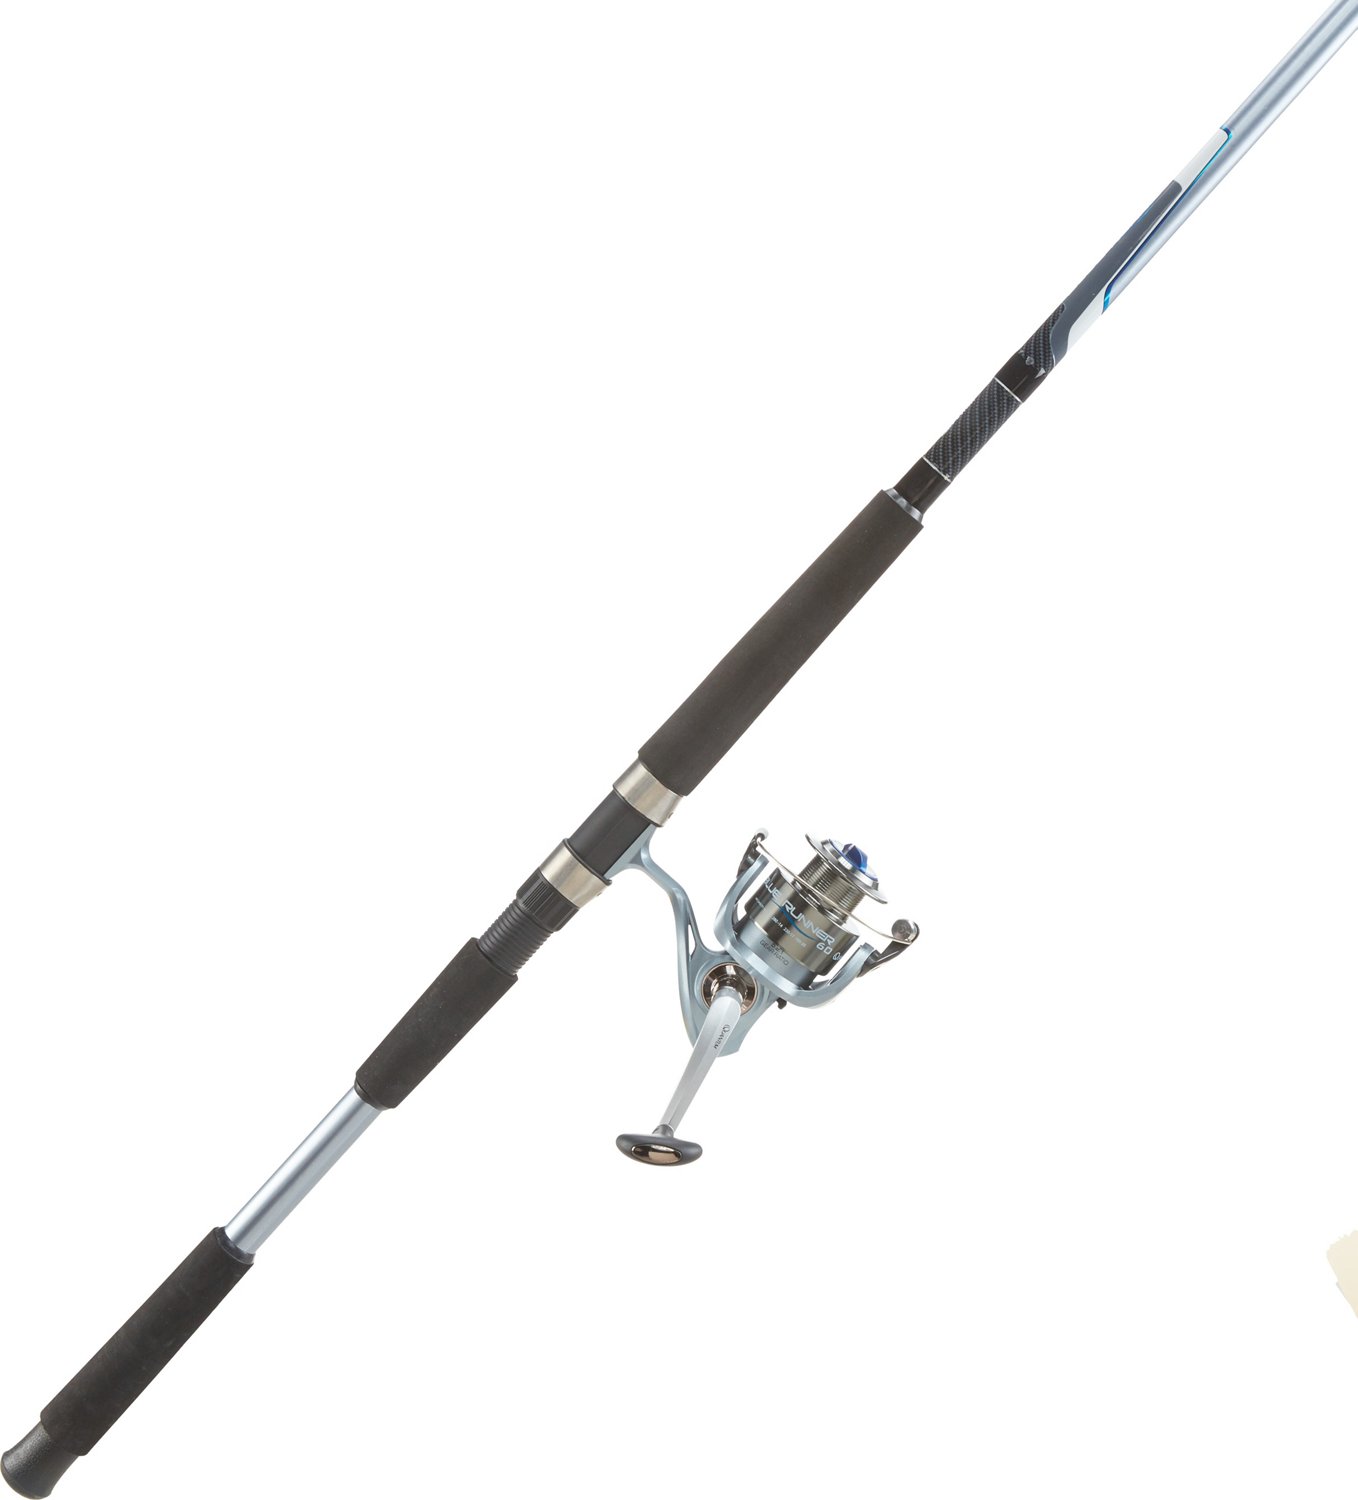  Quantum Blue Runner Spinning Reel and Fishing Rod